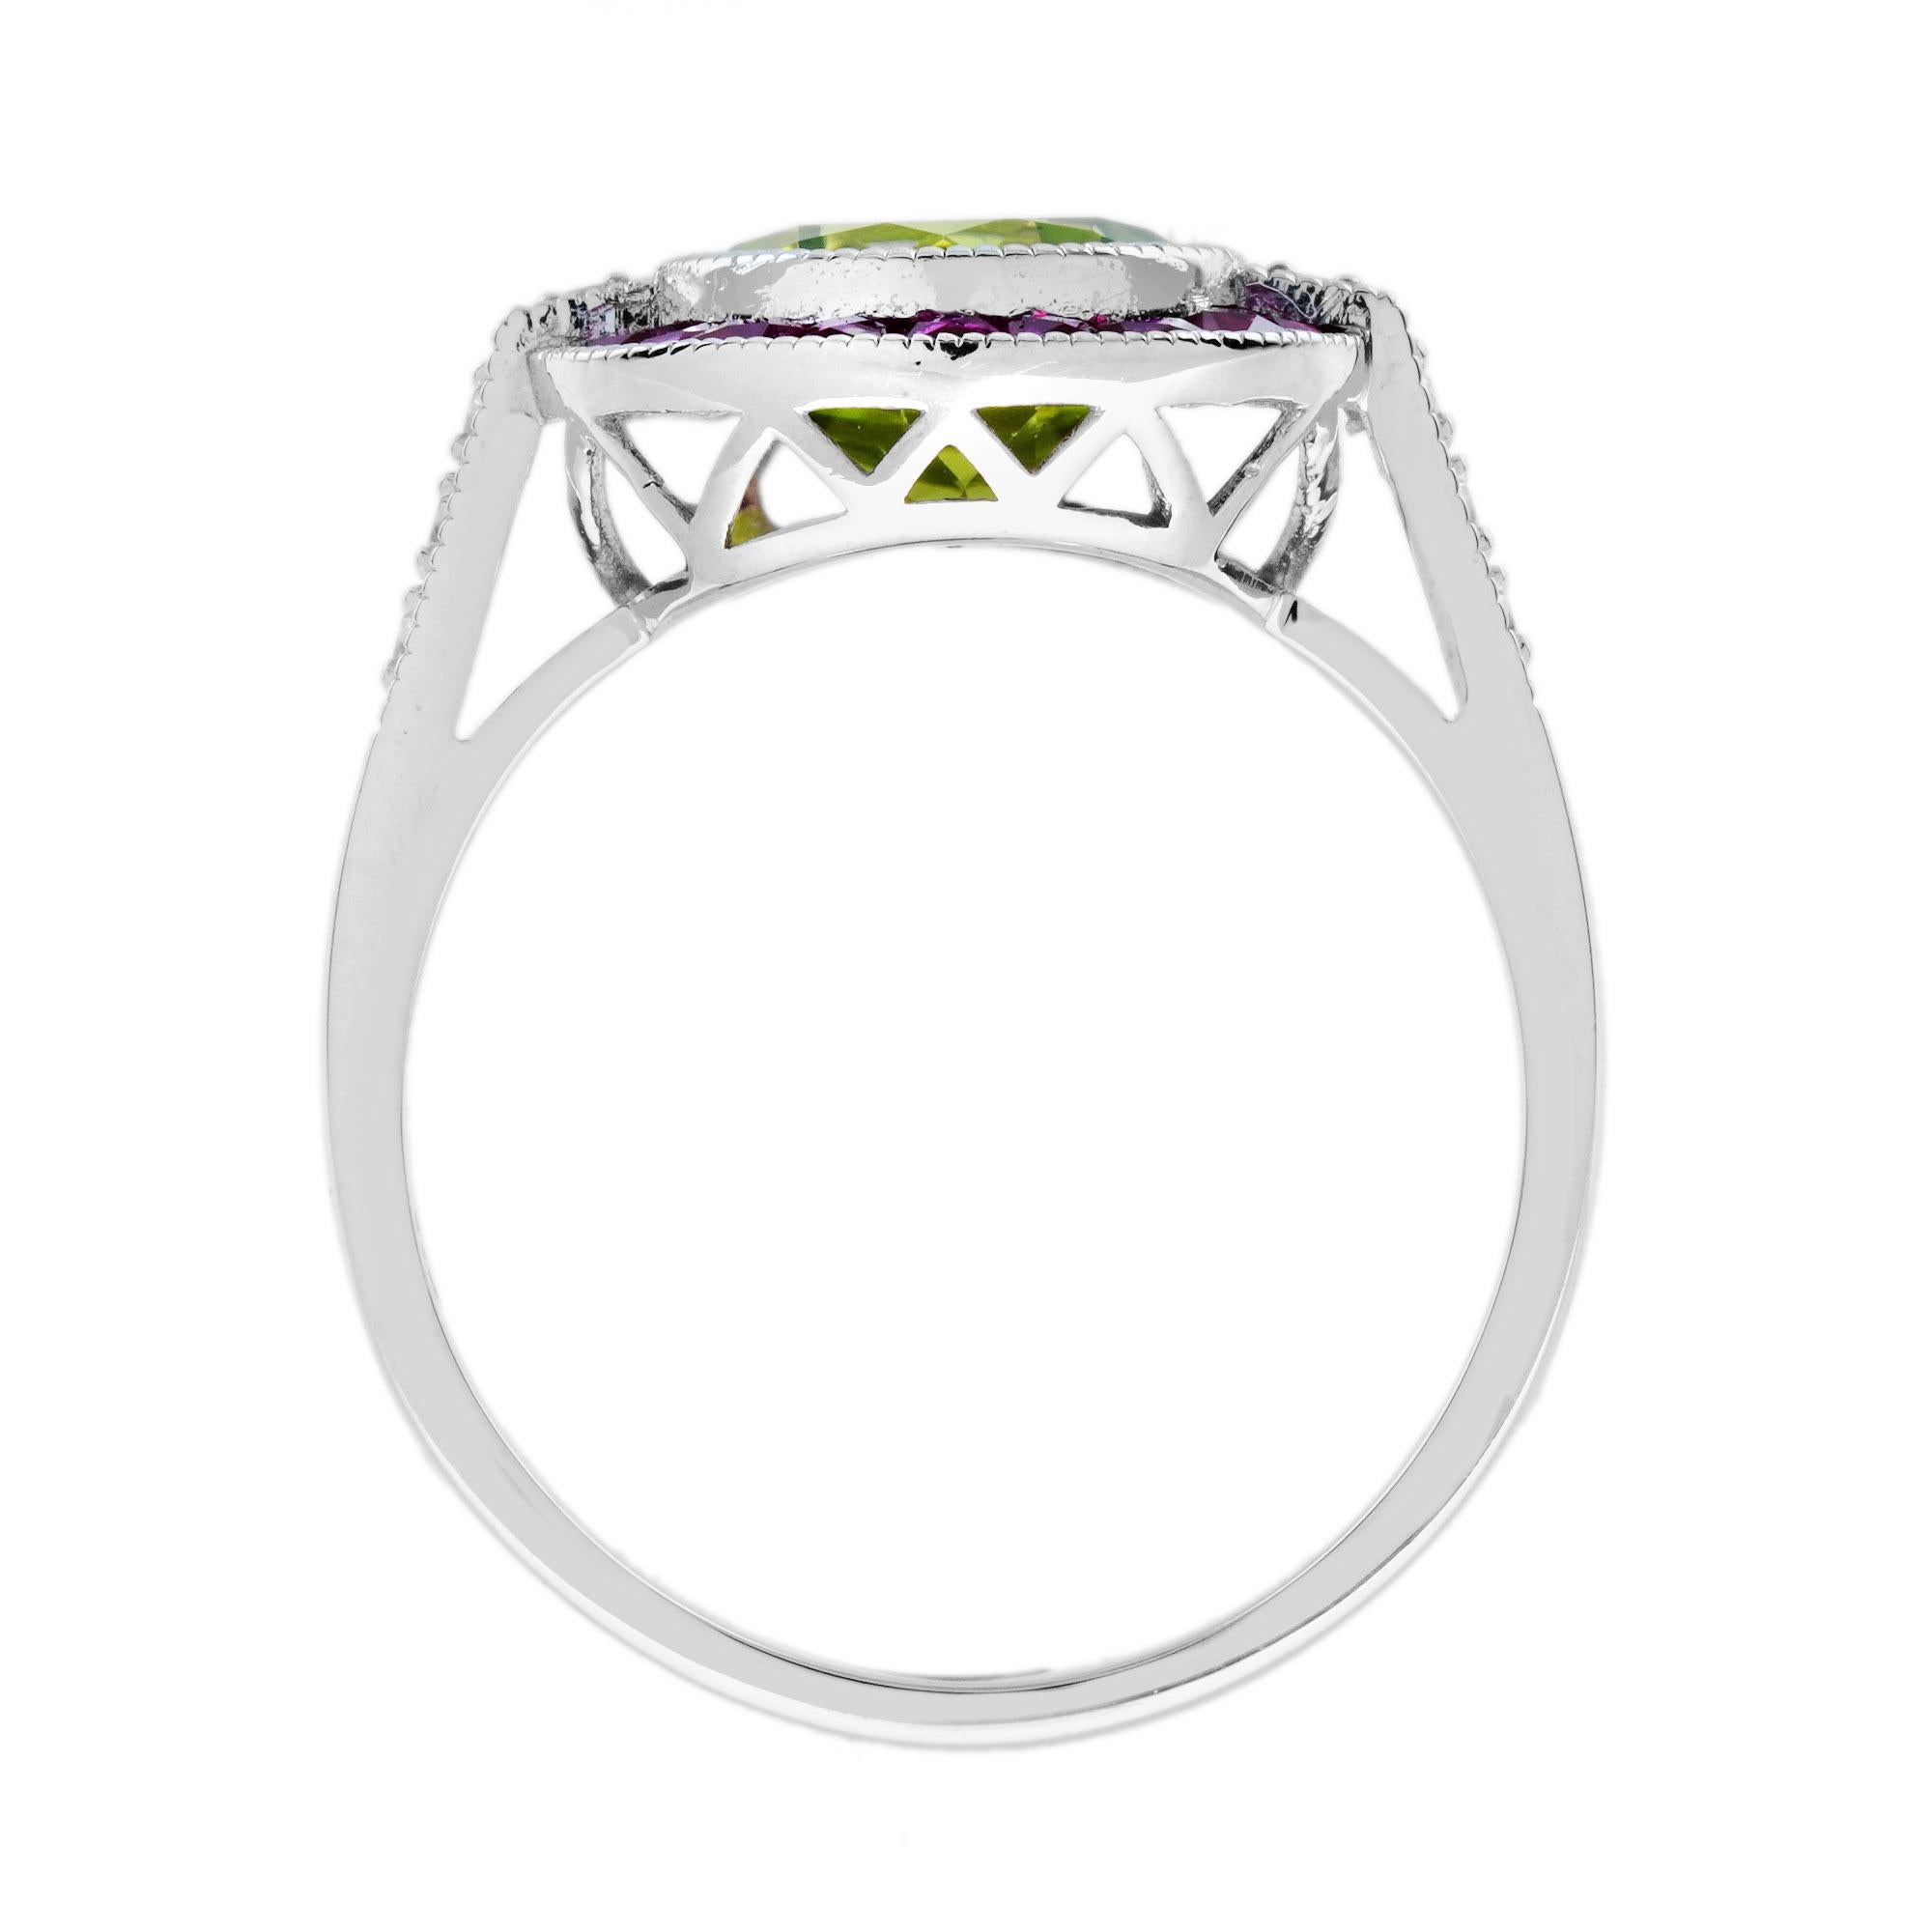 For Sale:  Peridot Ruby Diamond Art Deco Style Celebrate Target Ring in 14K White Gold 6